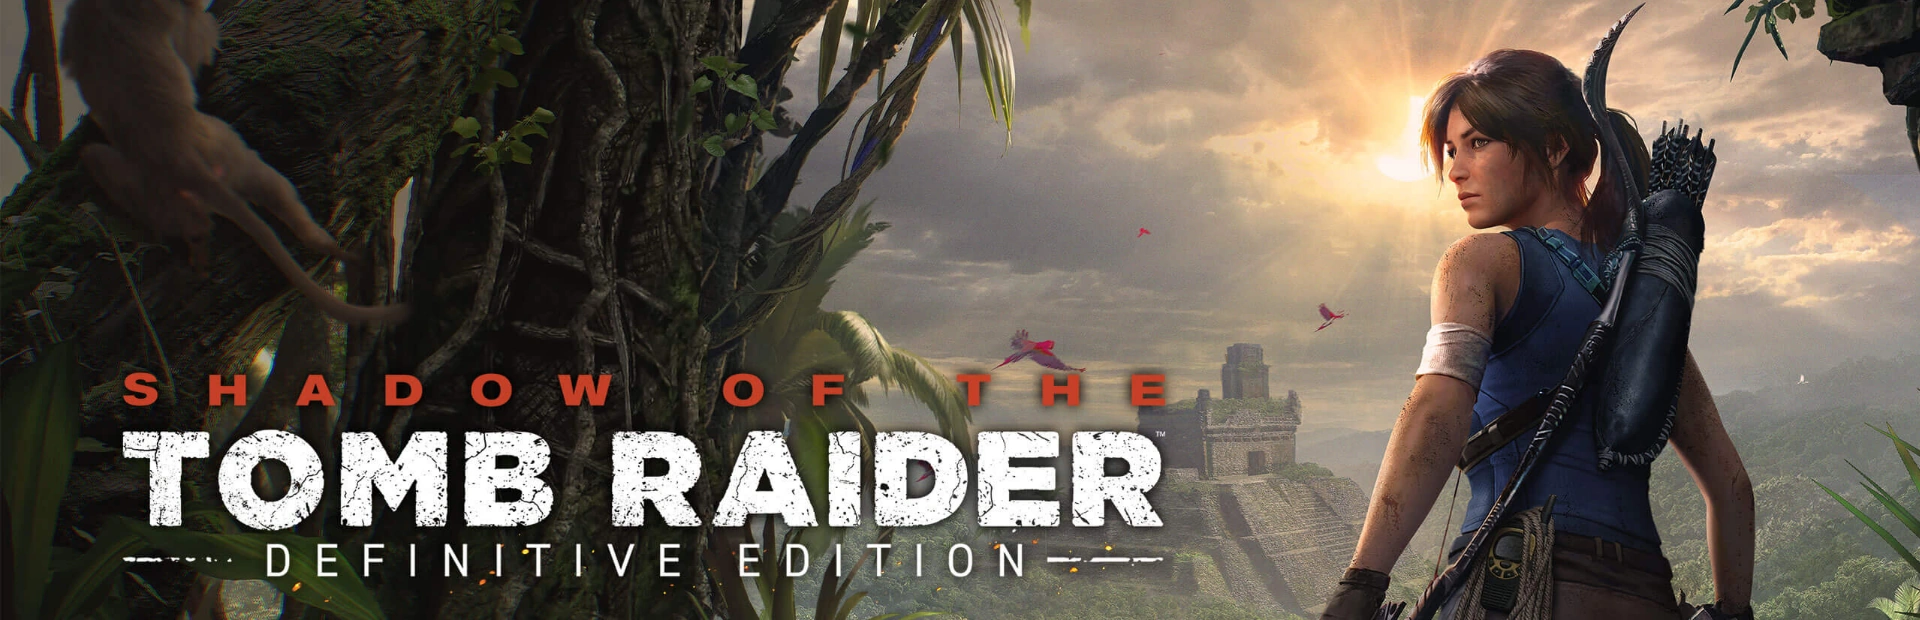 Shadow of the Tomb Raider.banner1